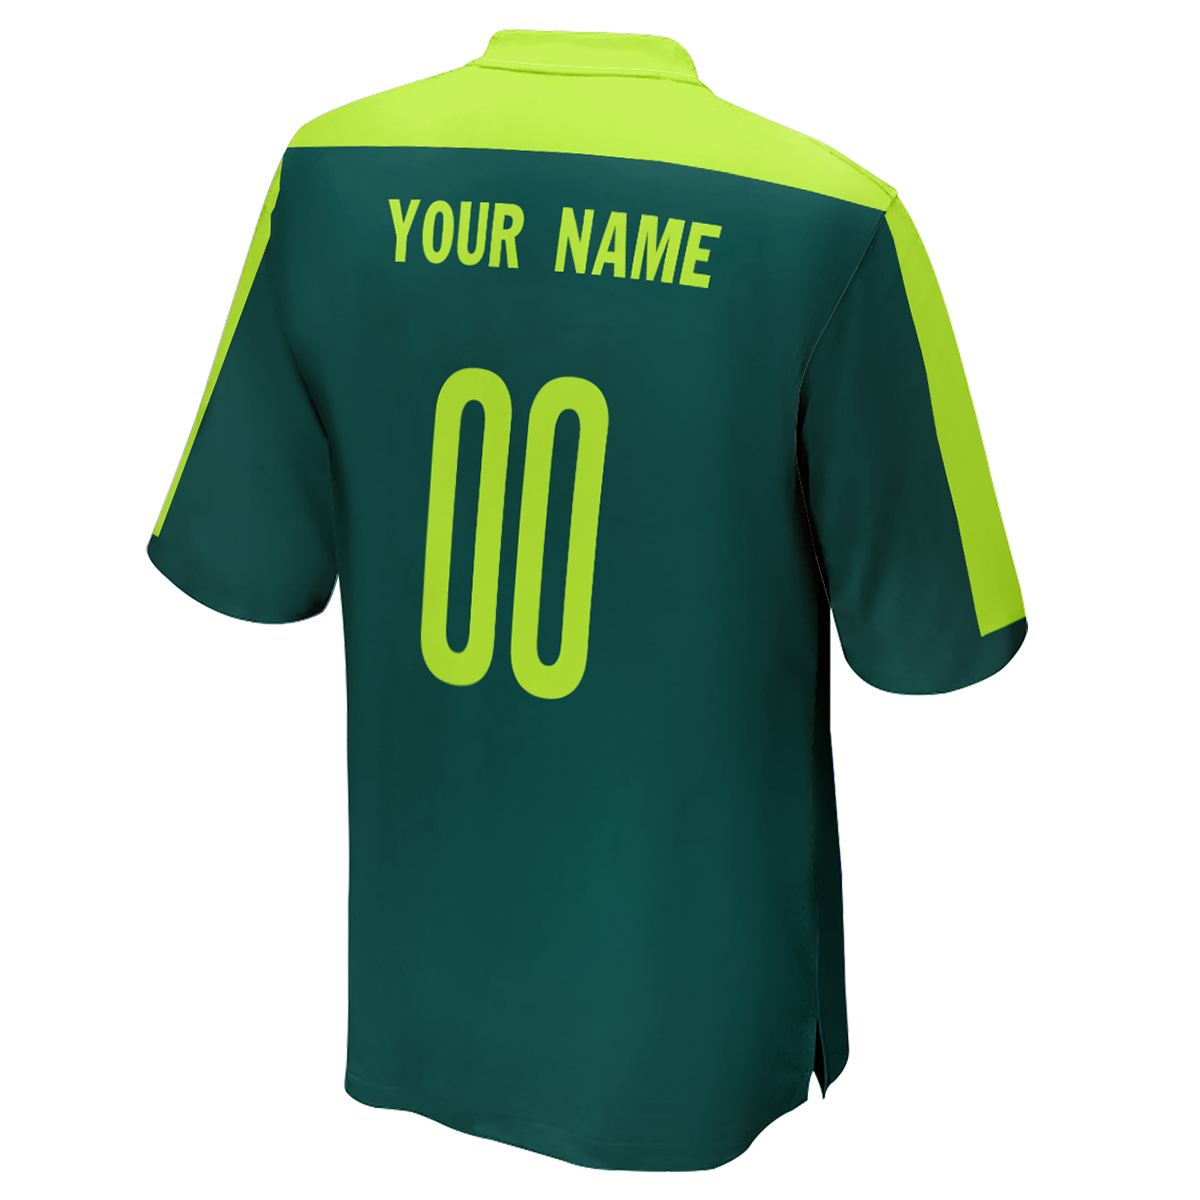 Men's Printed Senegal World Cup Custom Soccer Jersey With Logo